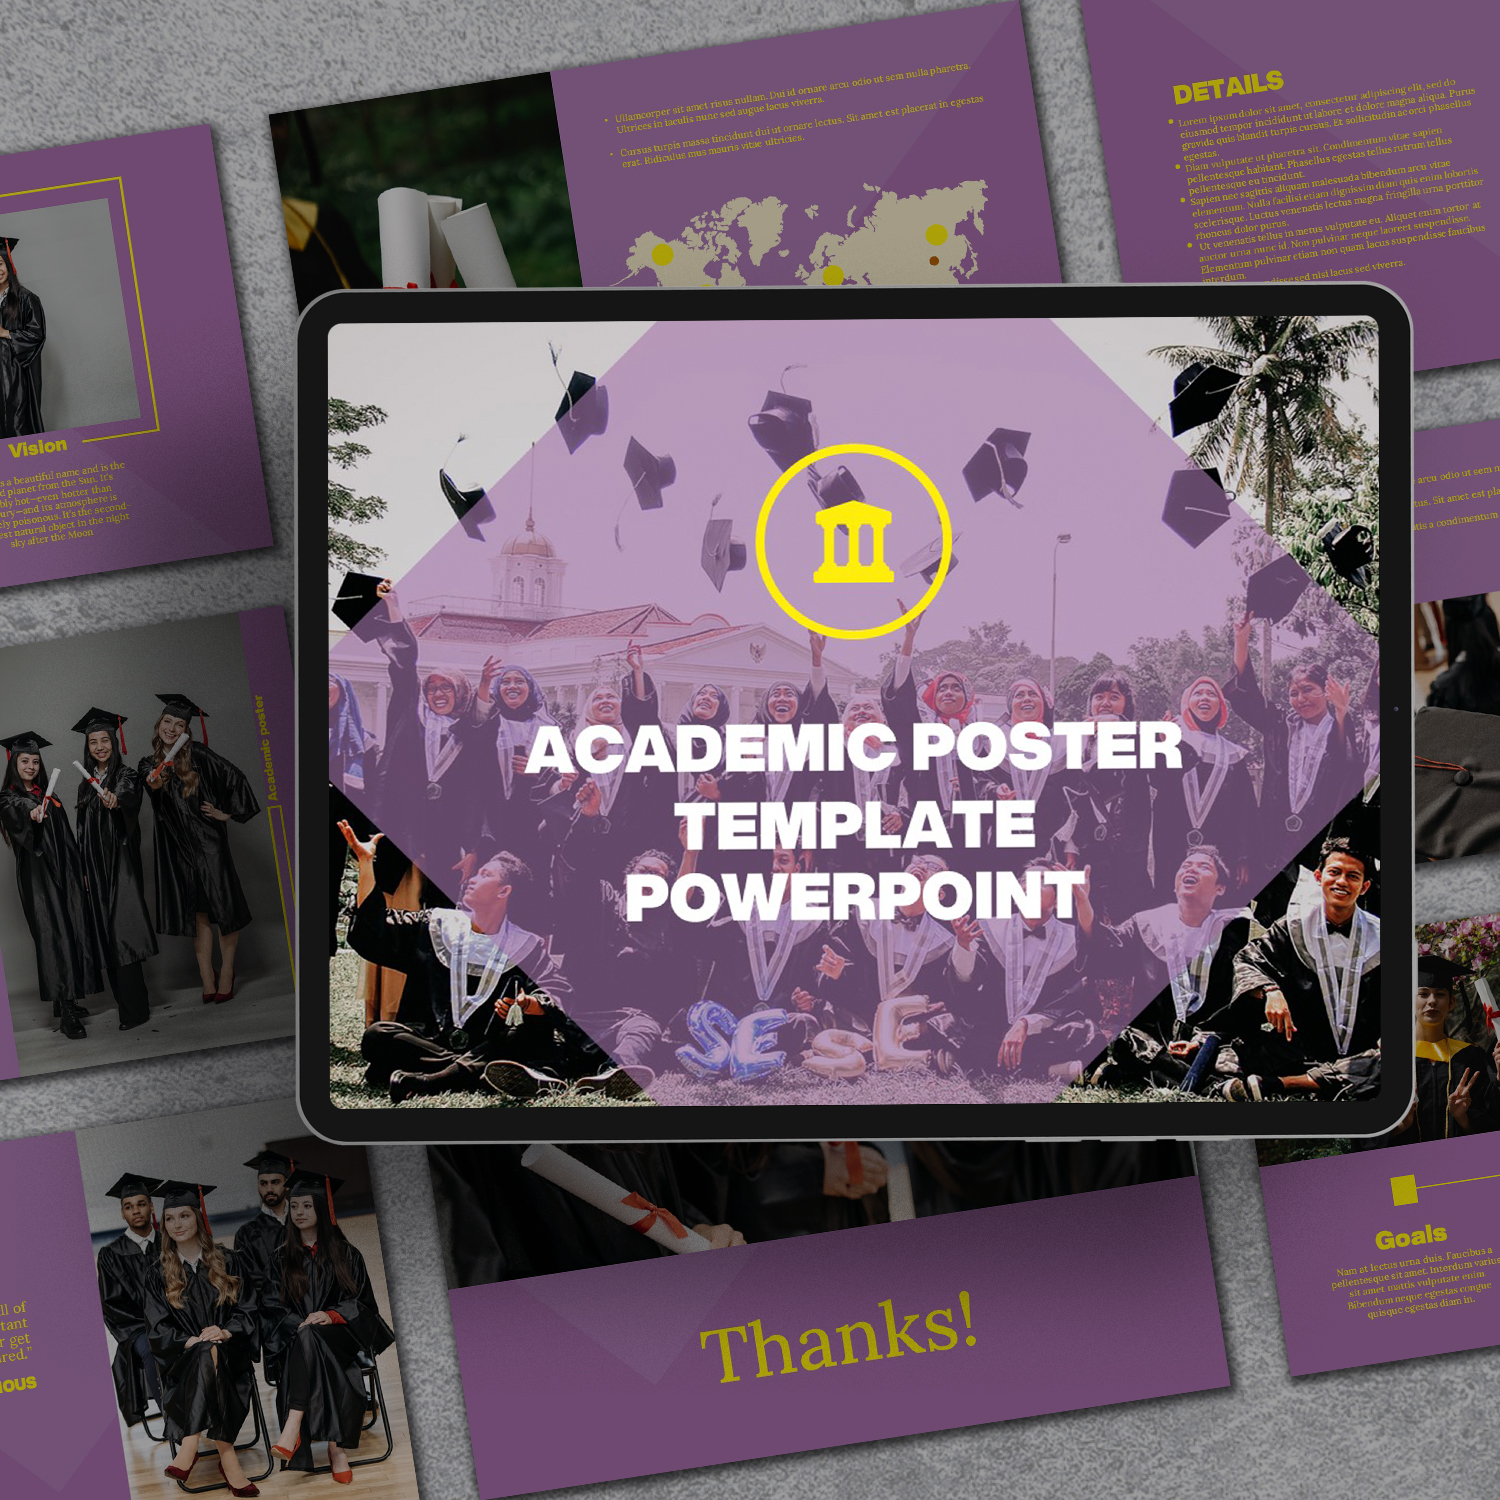 Preview academic poster template powerpoint.